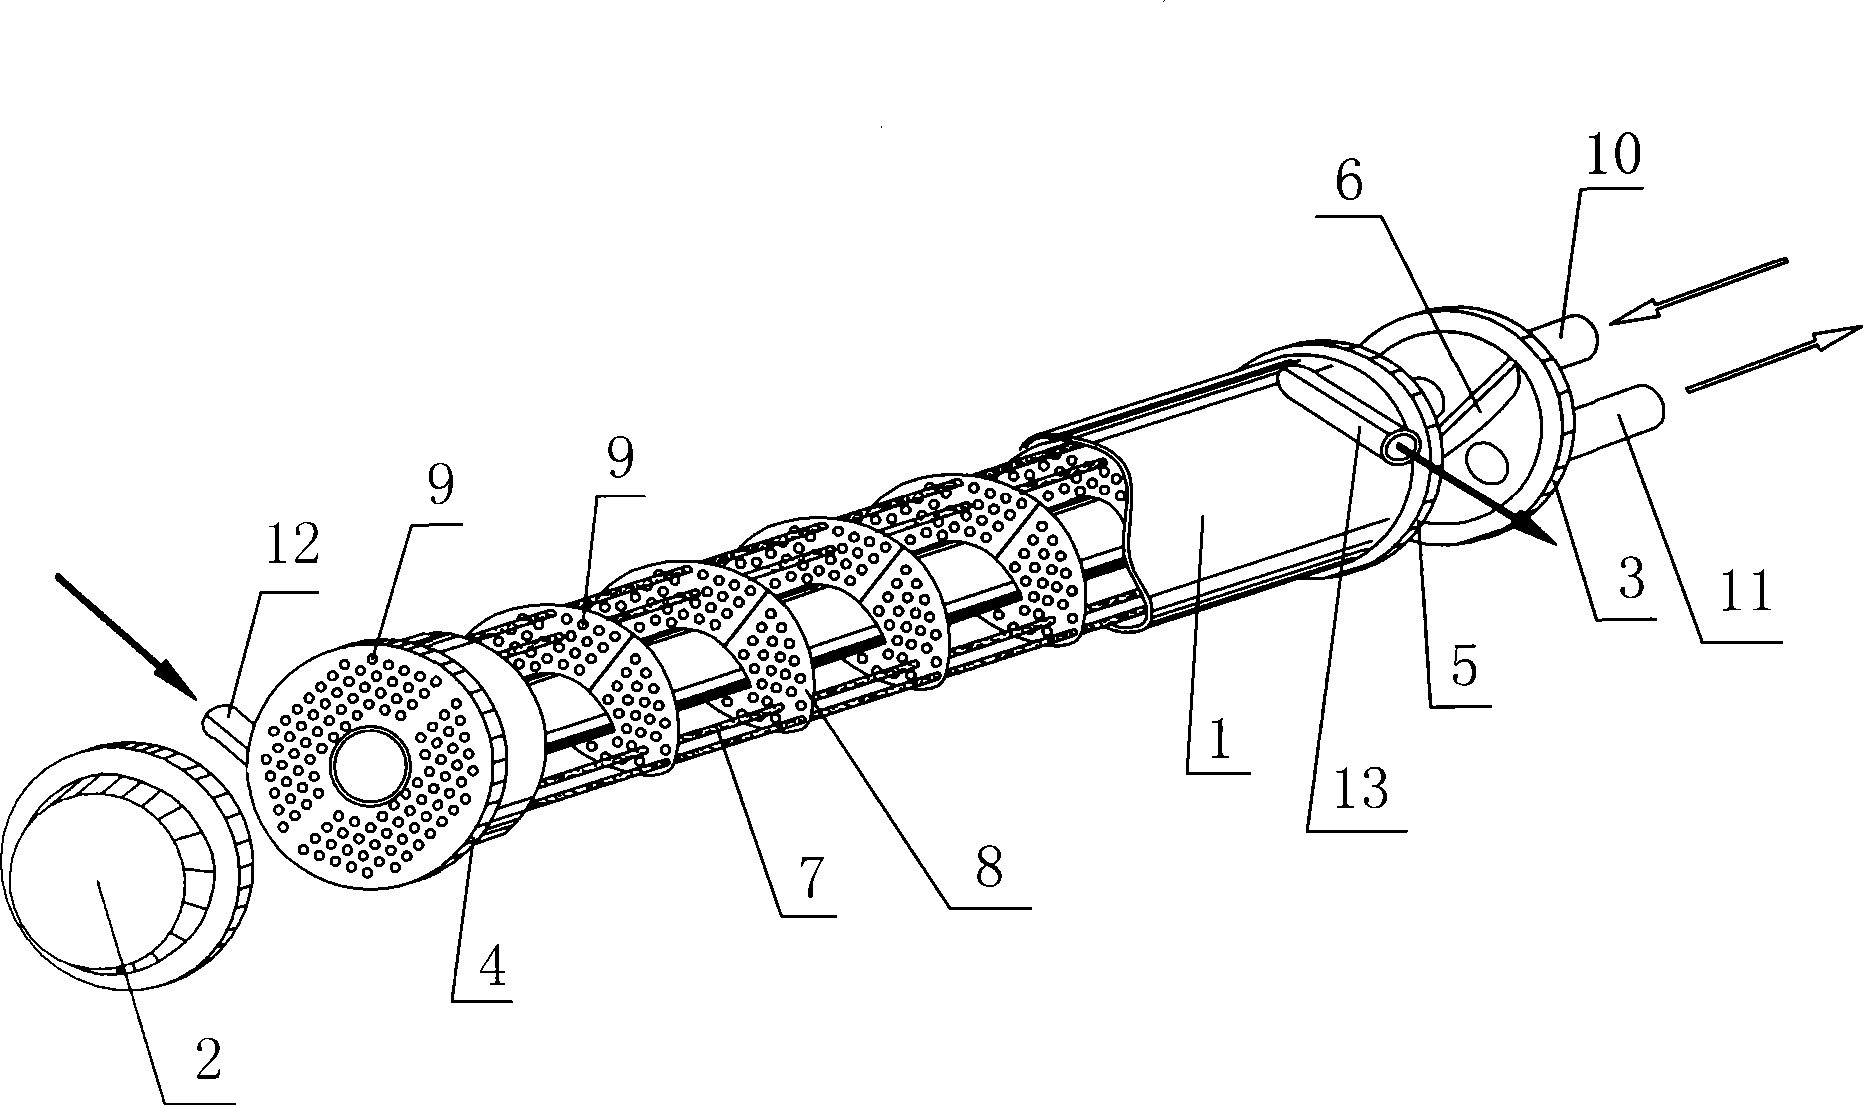 Shell-pipe head exchanger by double helix flowing of fluid medium in or out of heat exchange tube